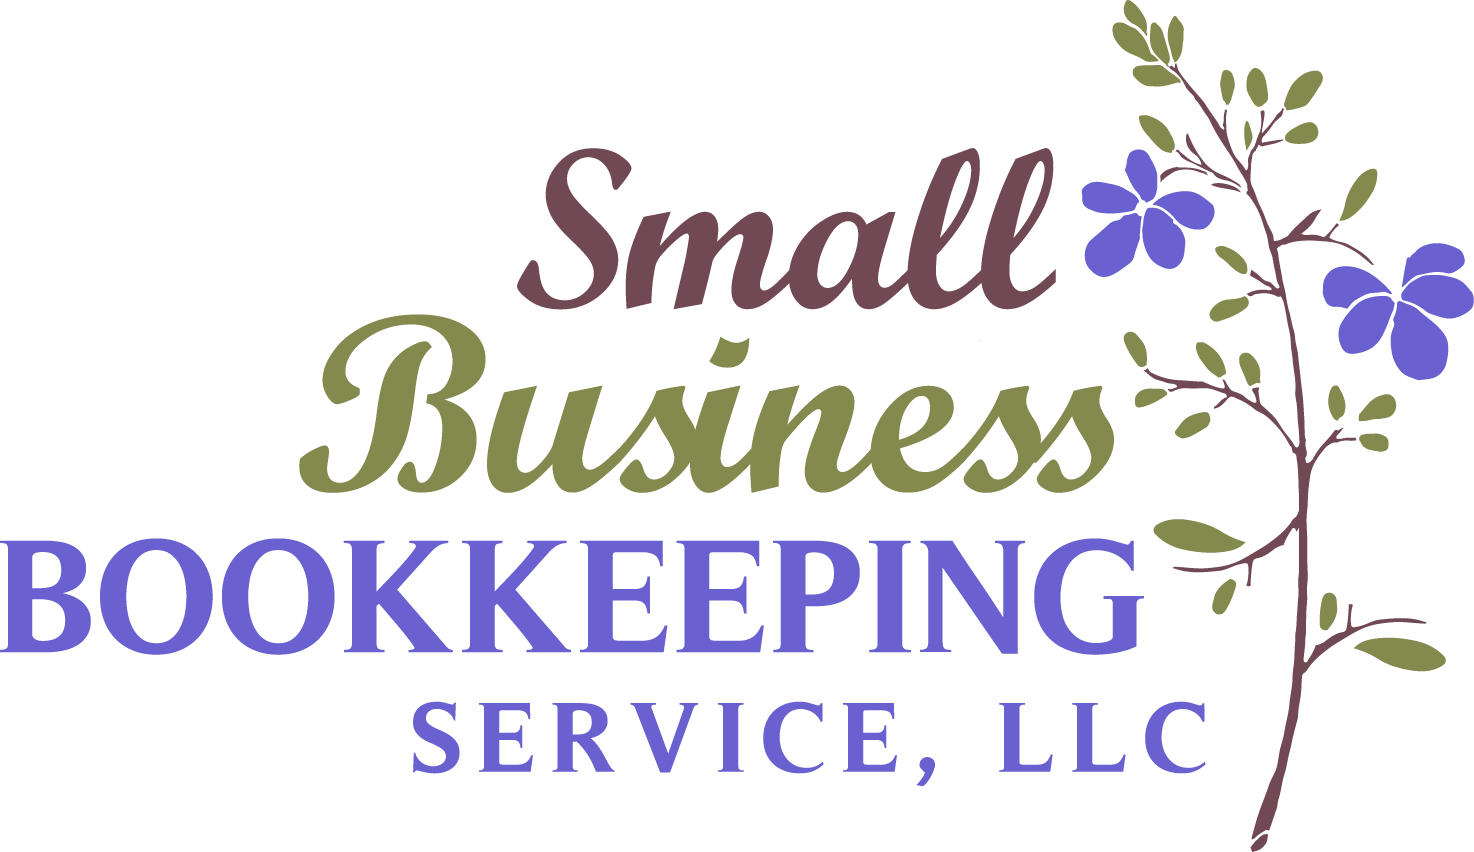 Small Business Bookkeeping Service